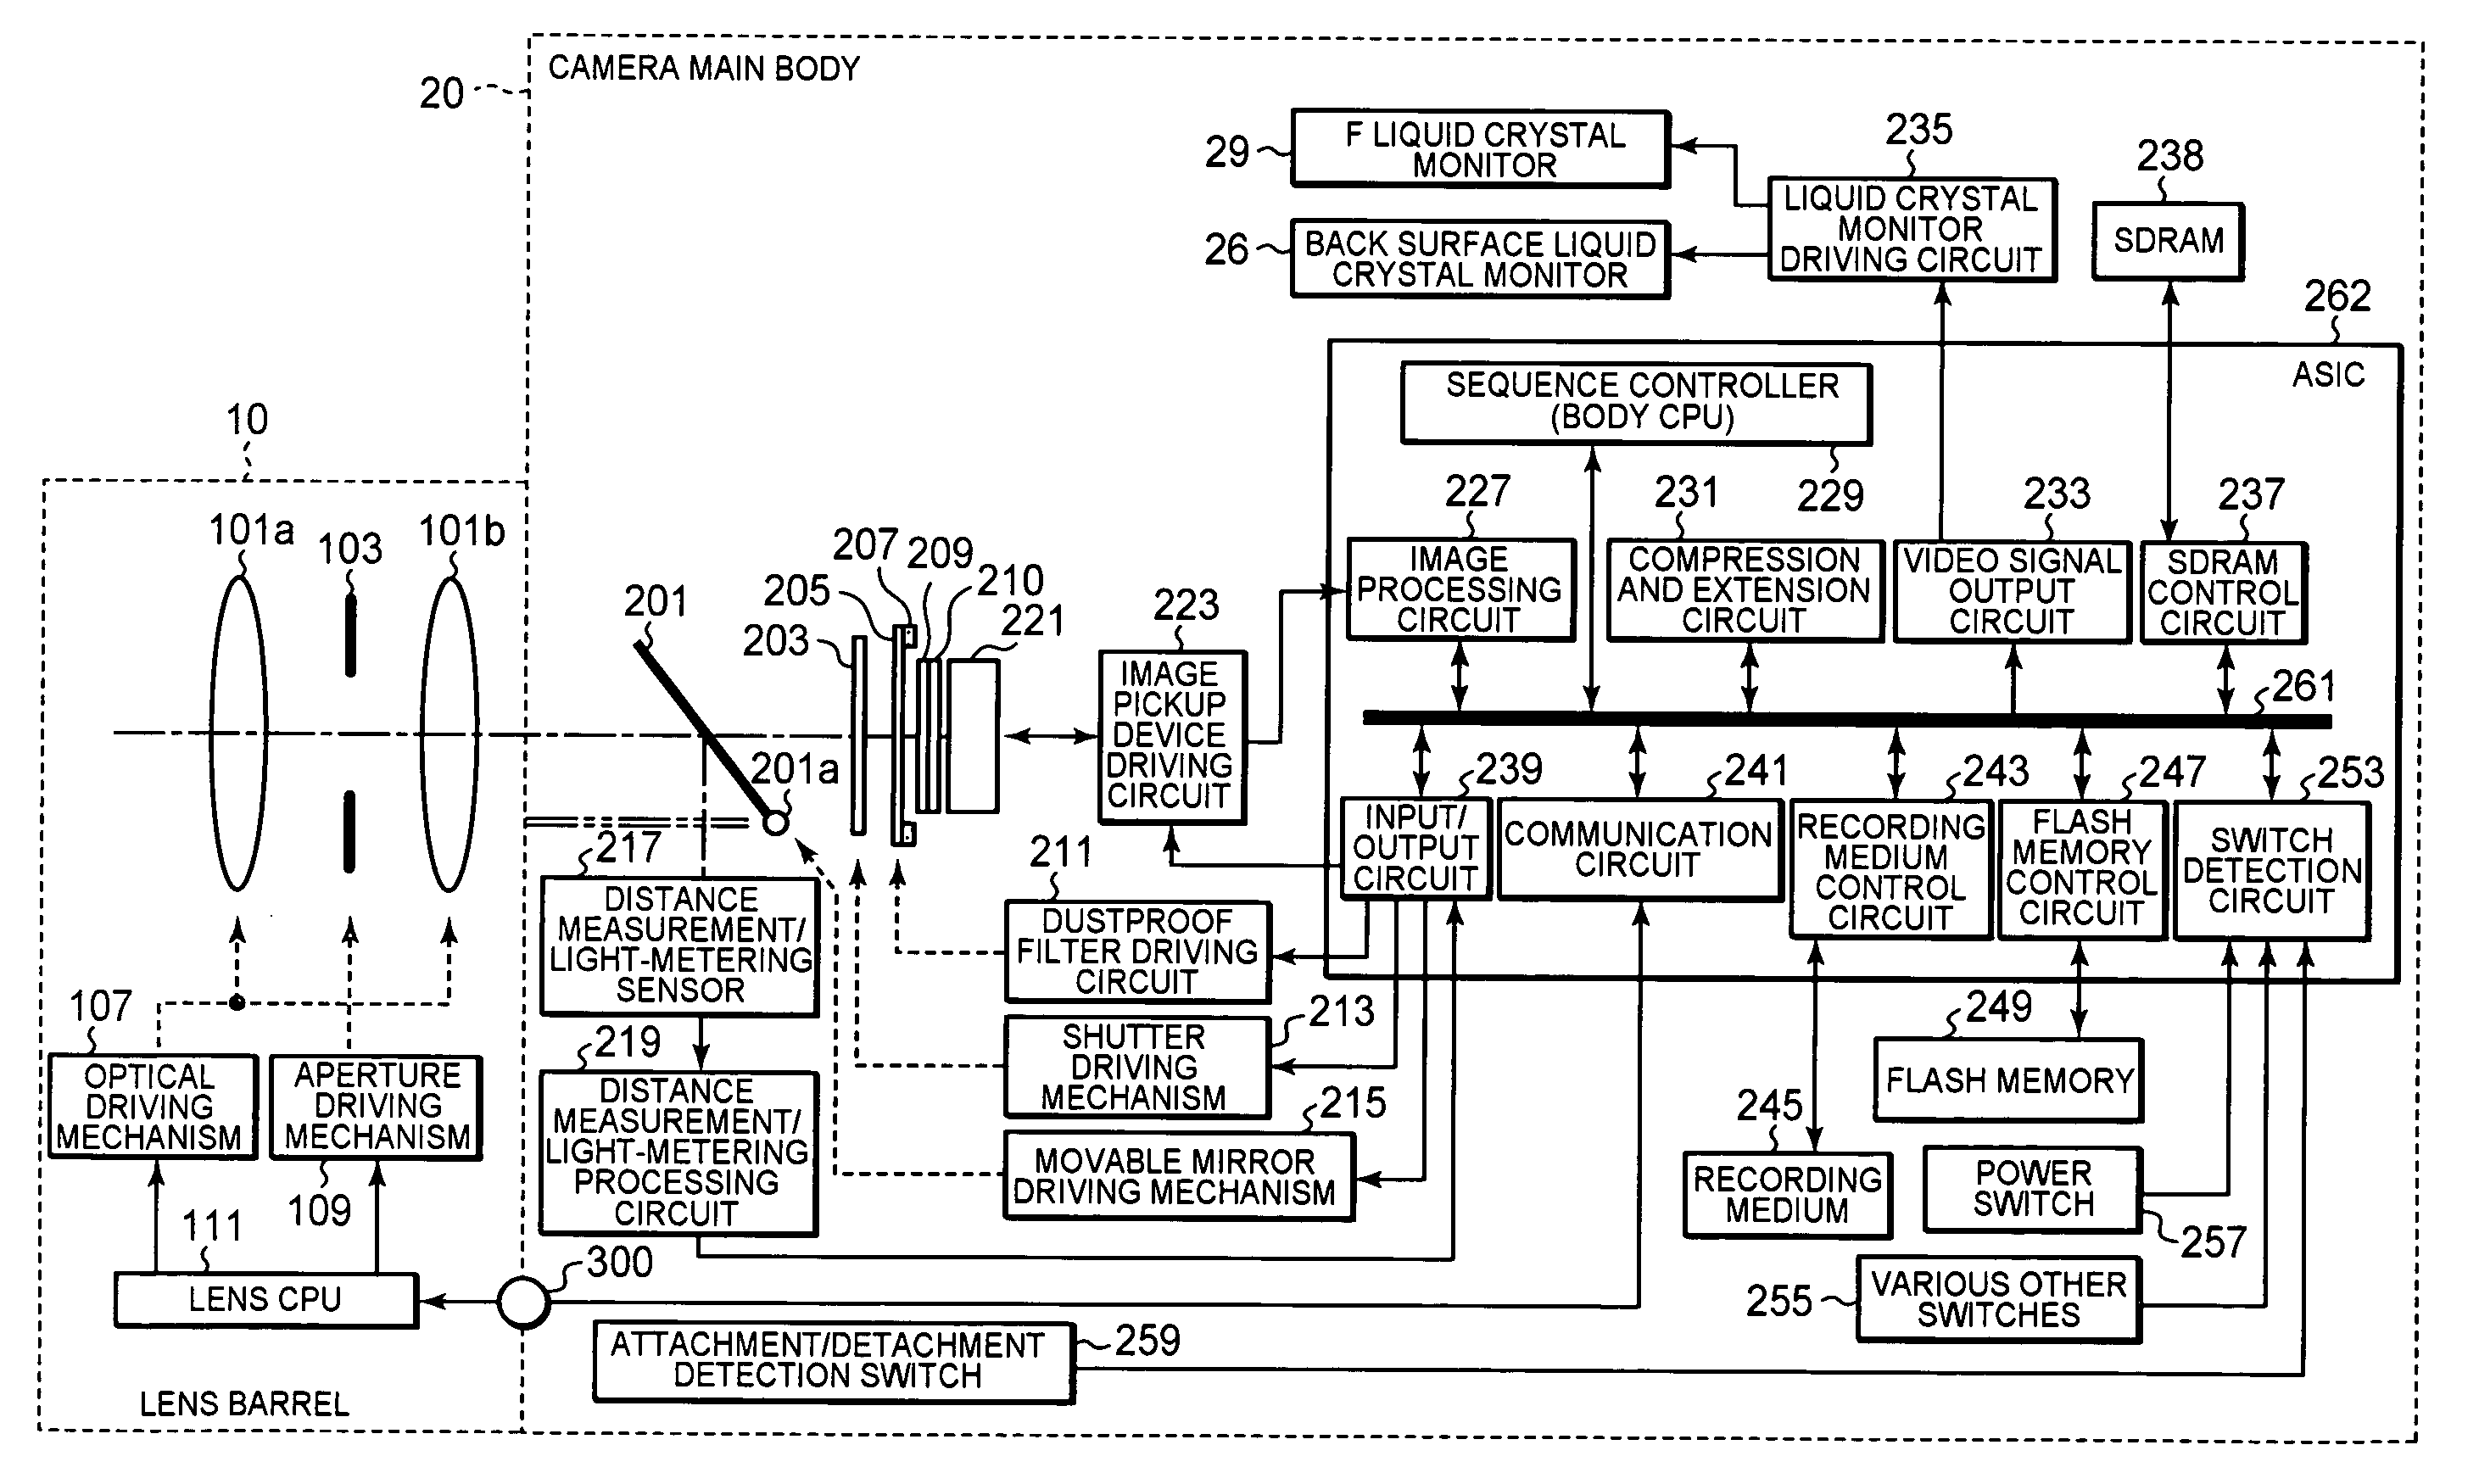 Aperture value calculation for a digital camera capable of displaying and/or recording a movie image